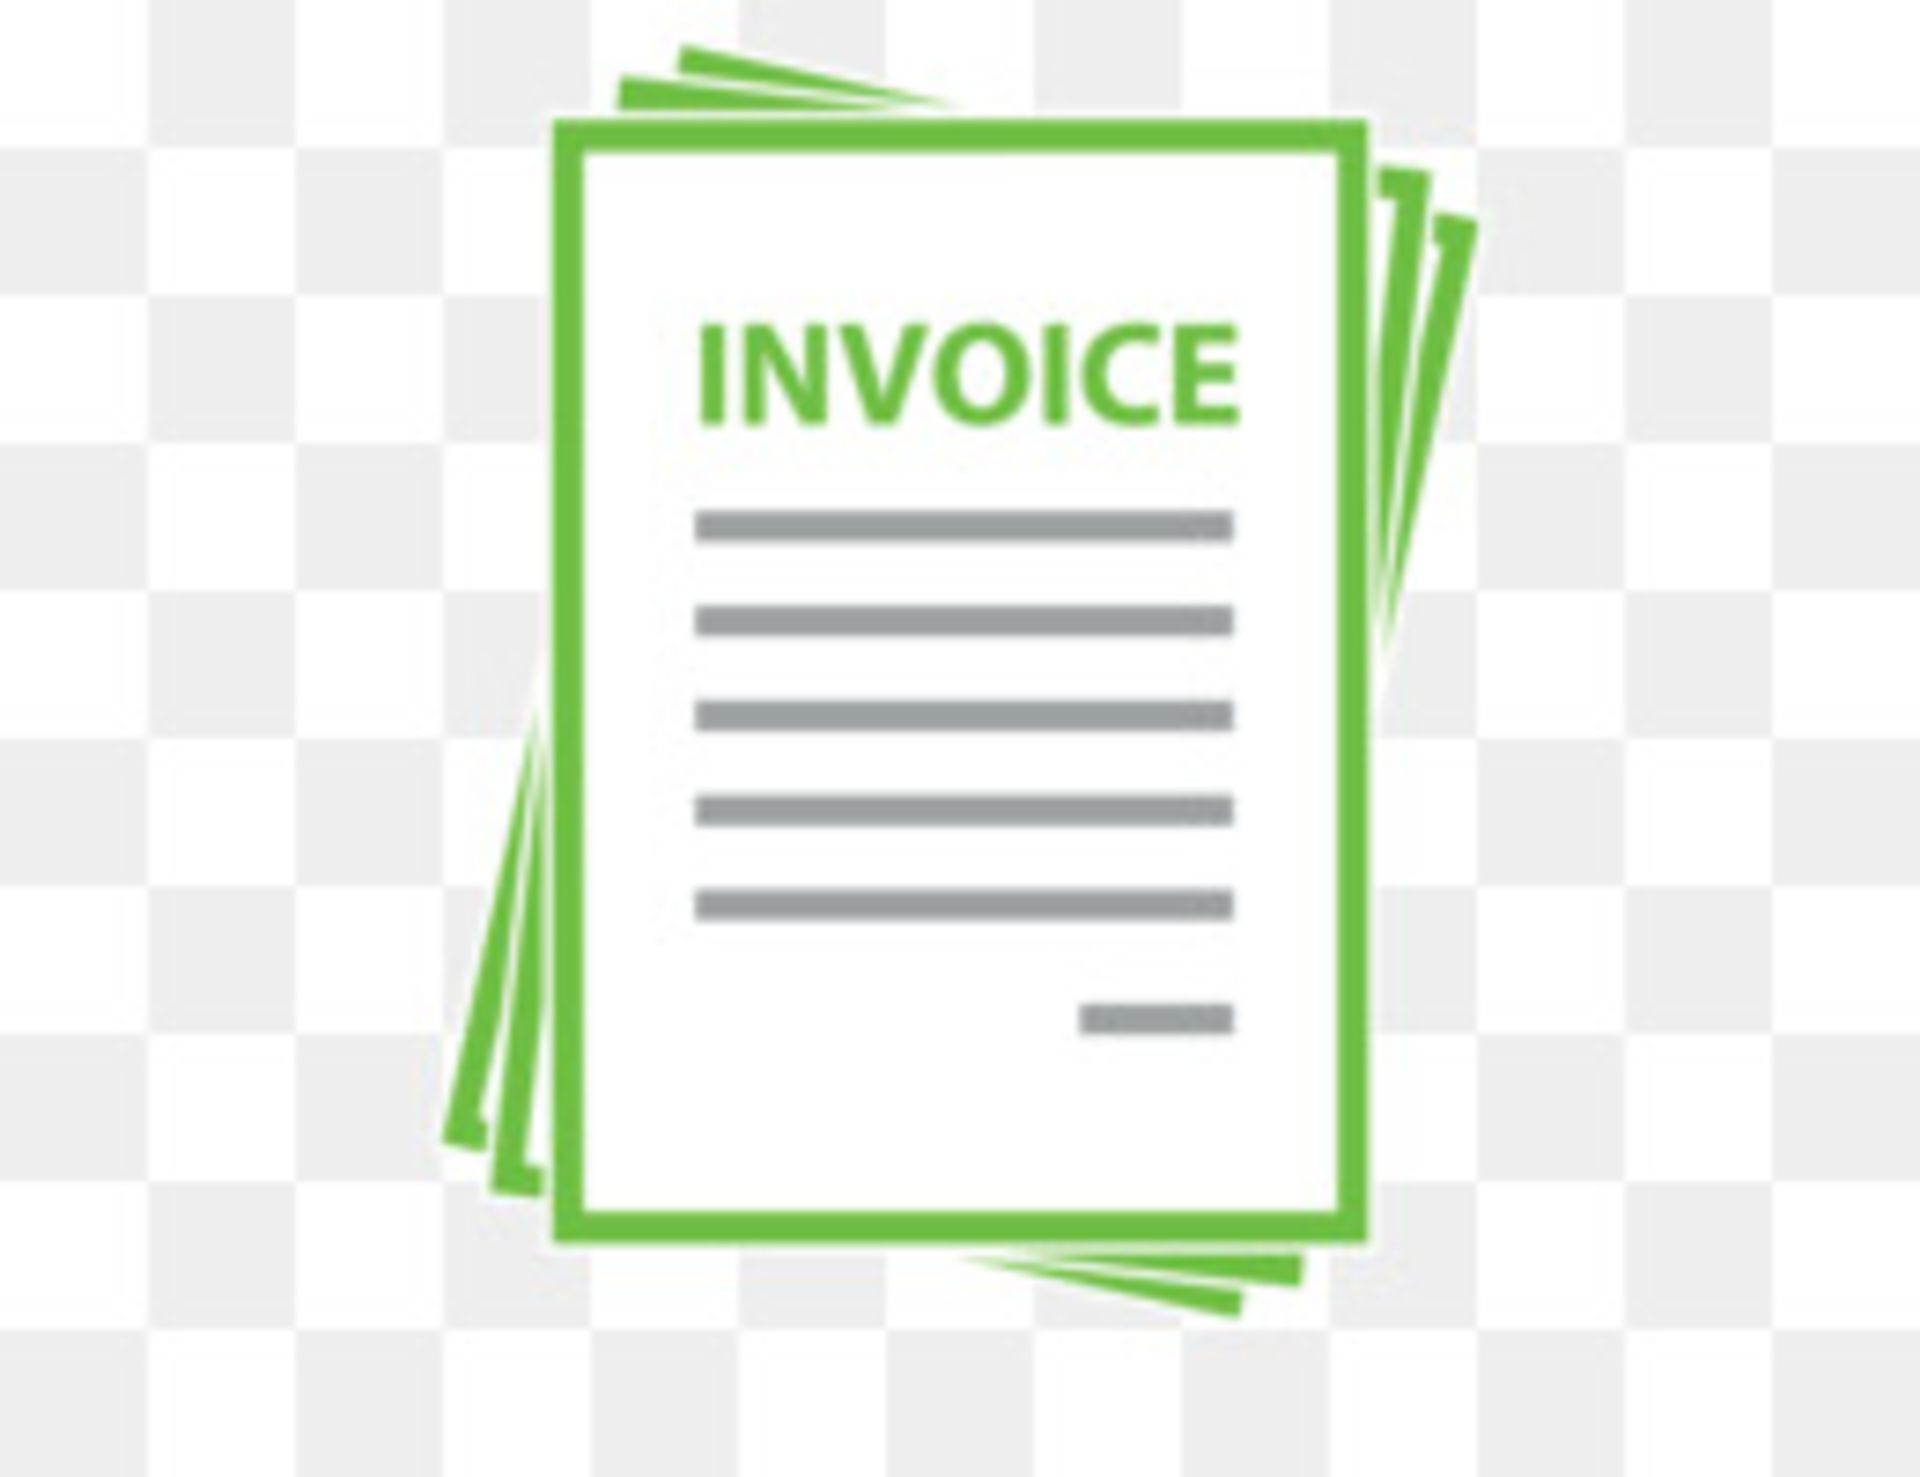 You Will Receive An Invoice At The End Of The Auction On Wednesday For Any Items That You Have Won.